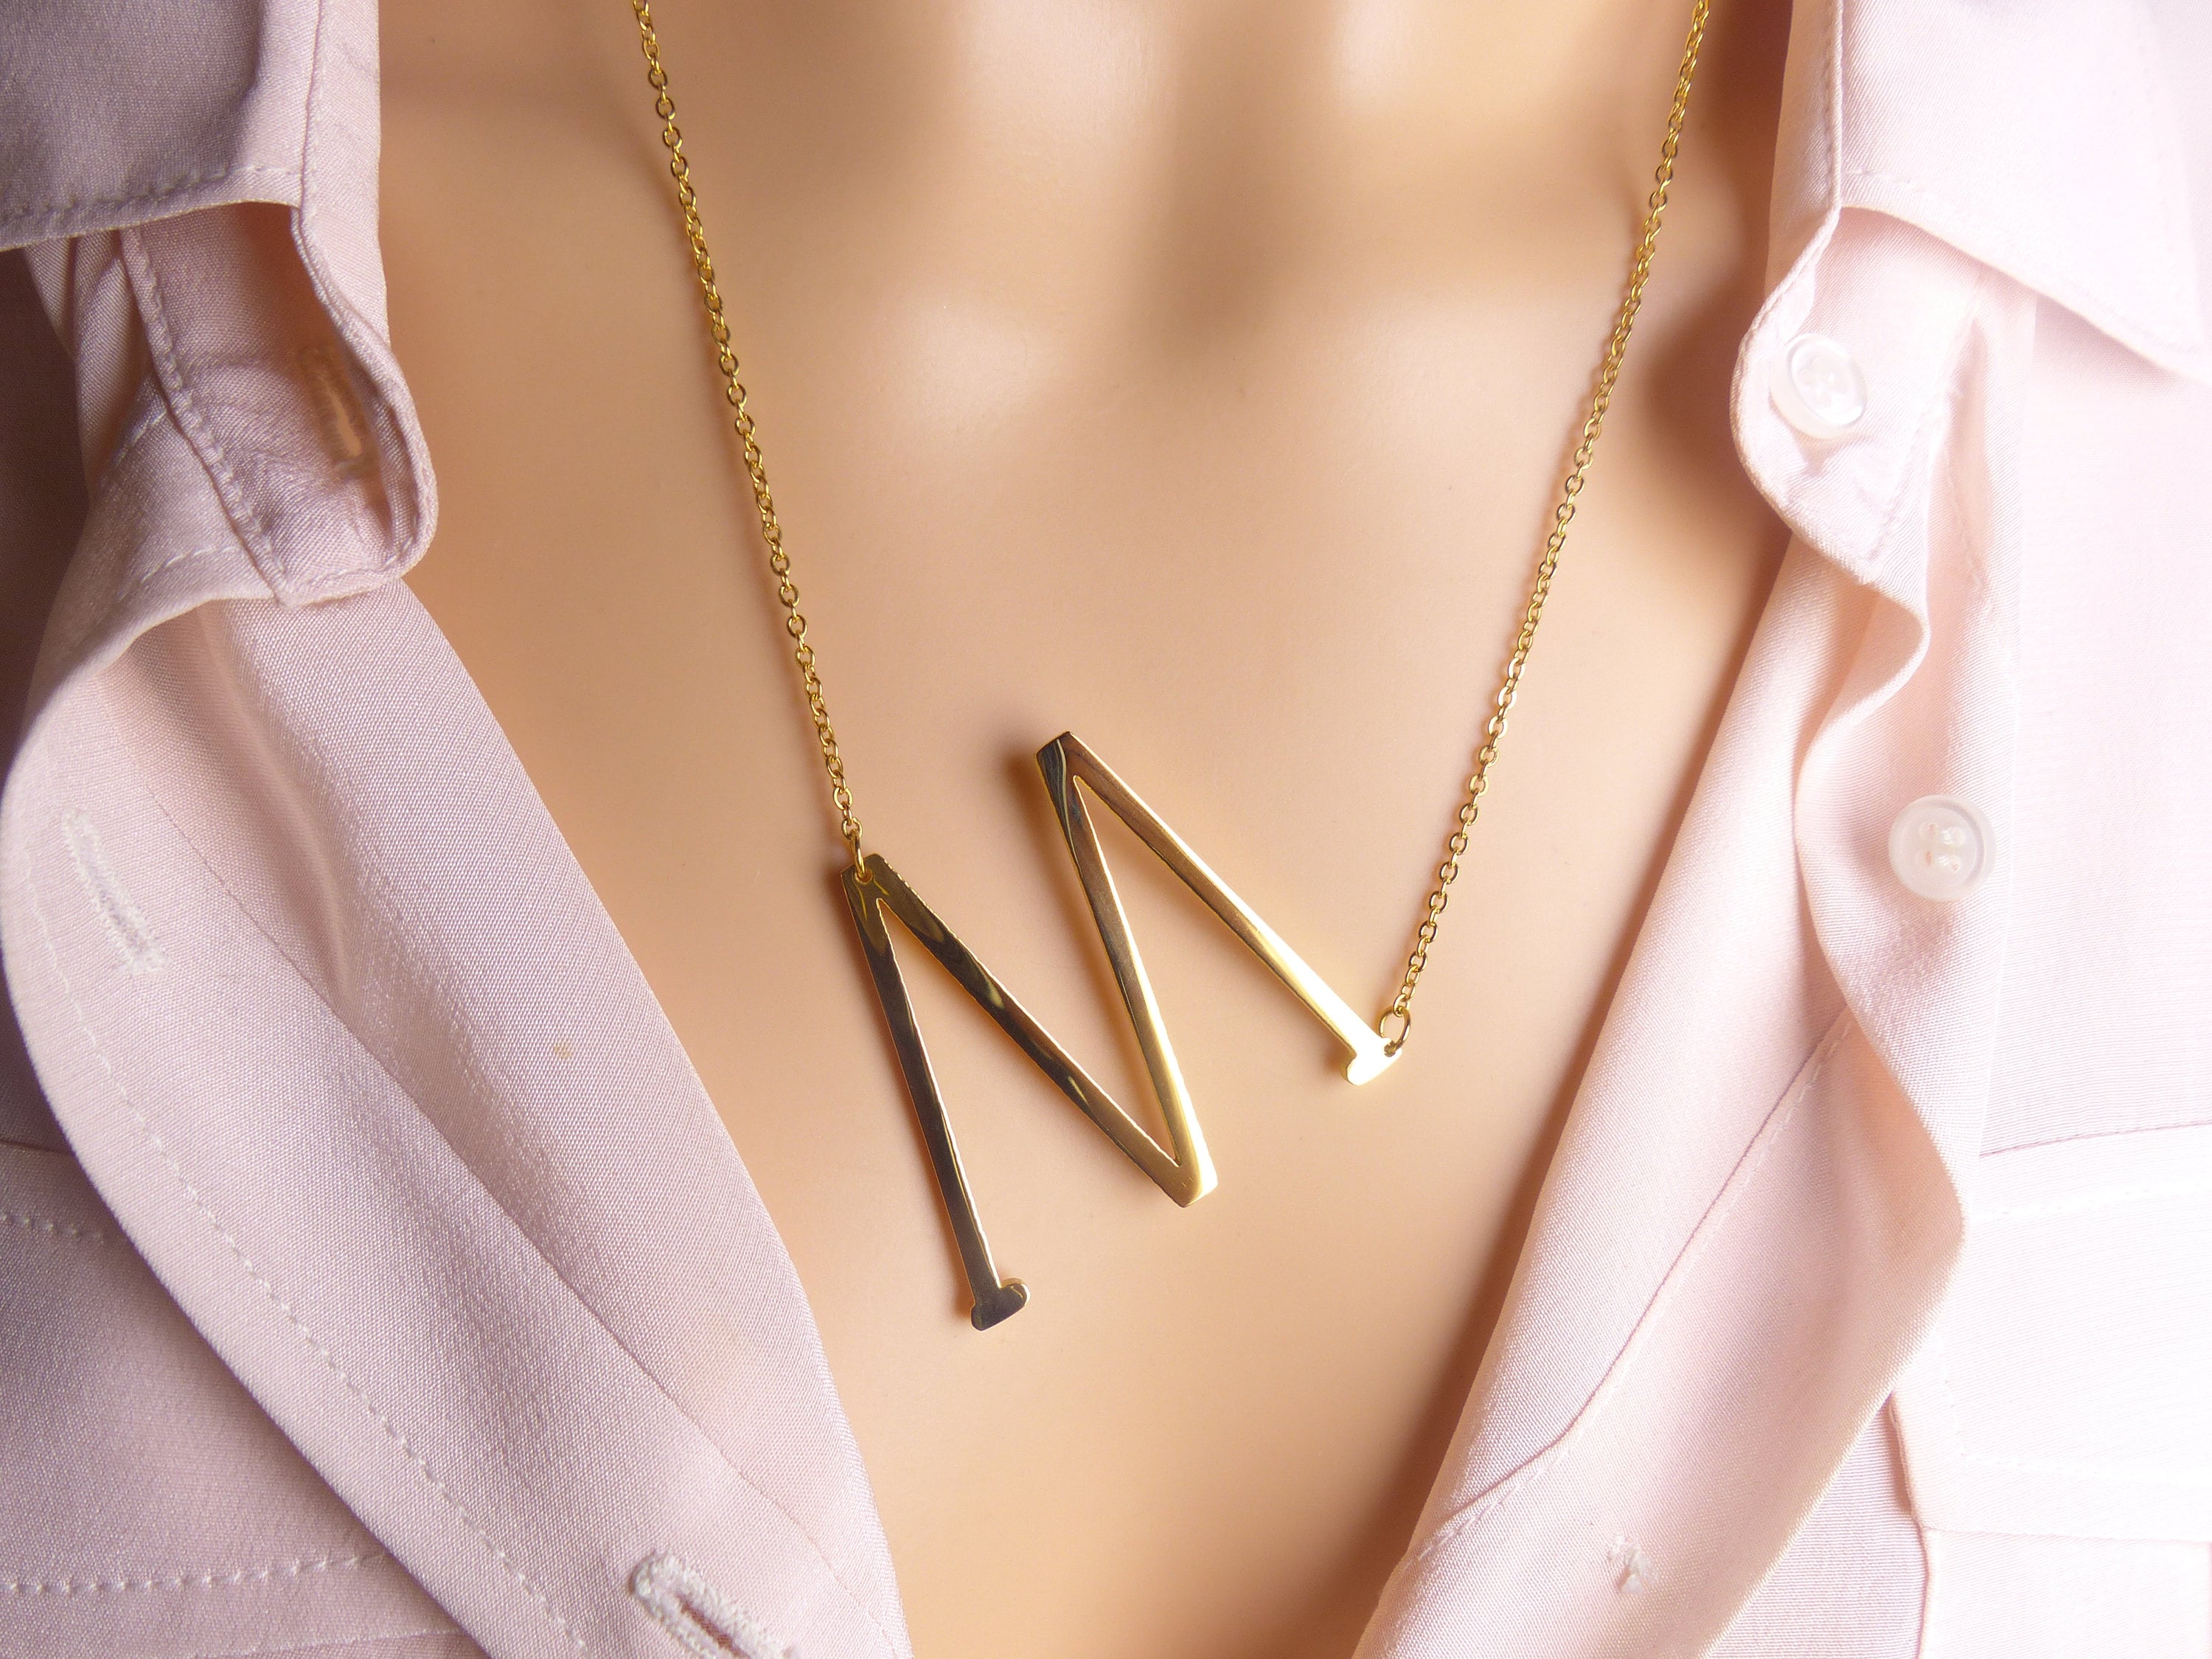 M” Initial & Diamond Necklace - 14K Yellow Gold – Marie's Jewelry Store